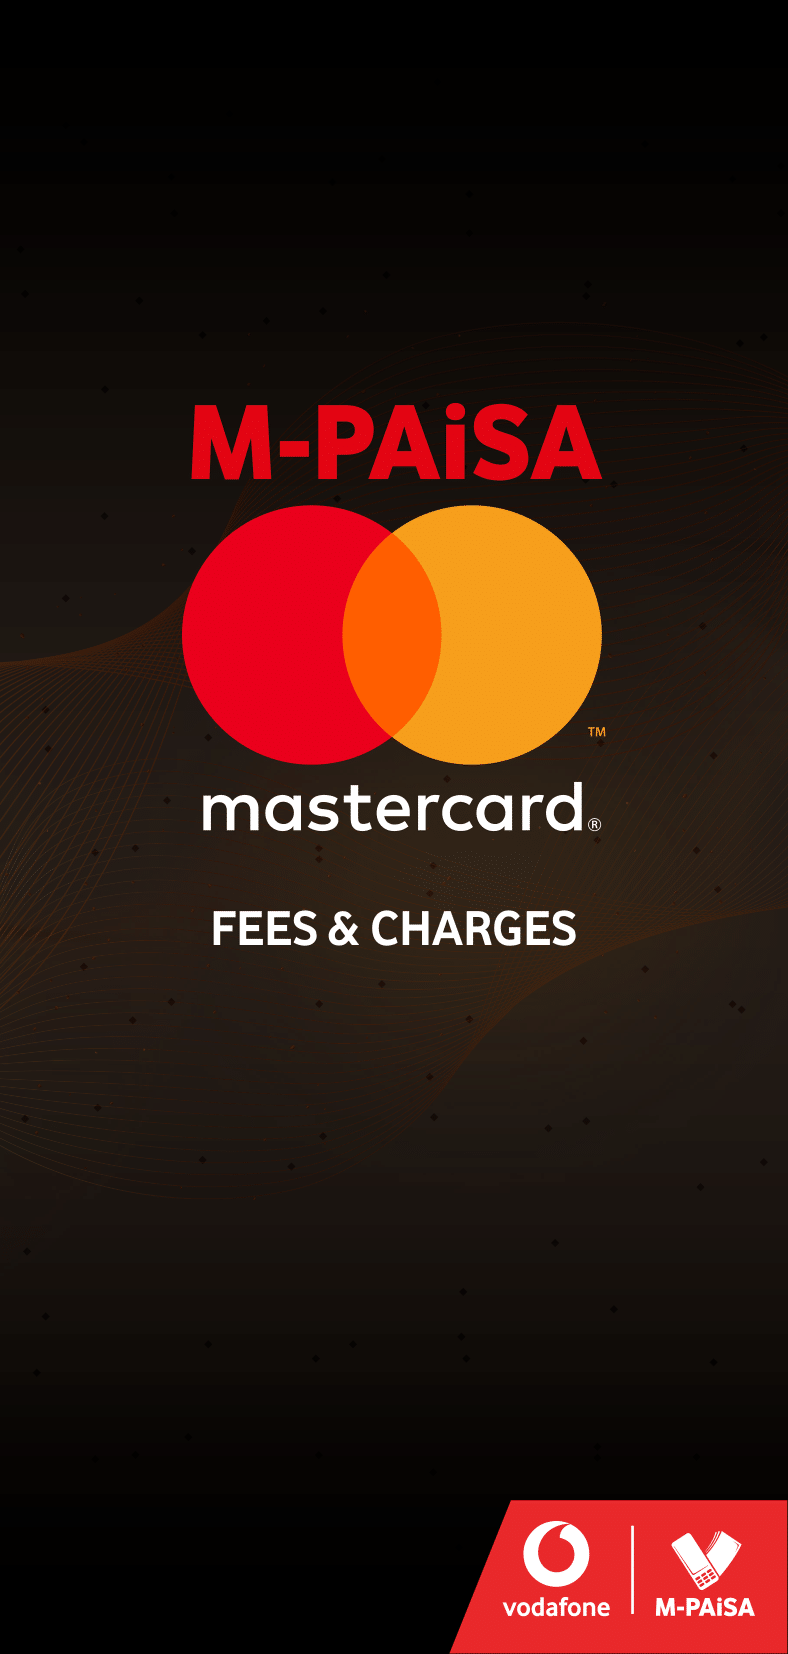 Mastercard fees & Charges v2-1